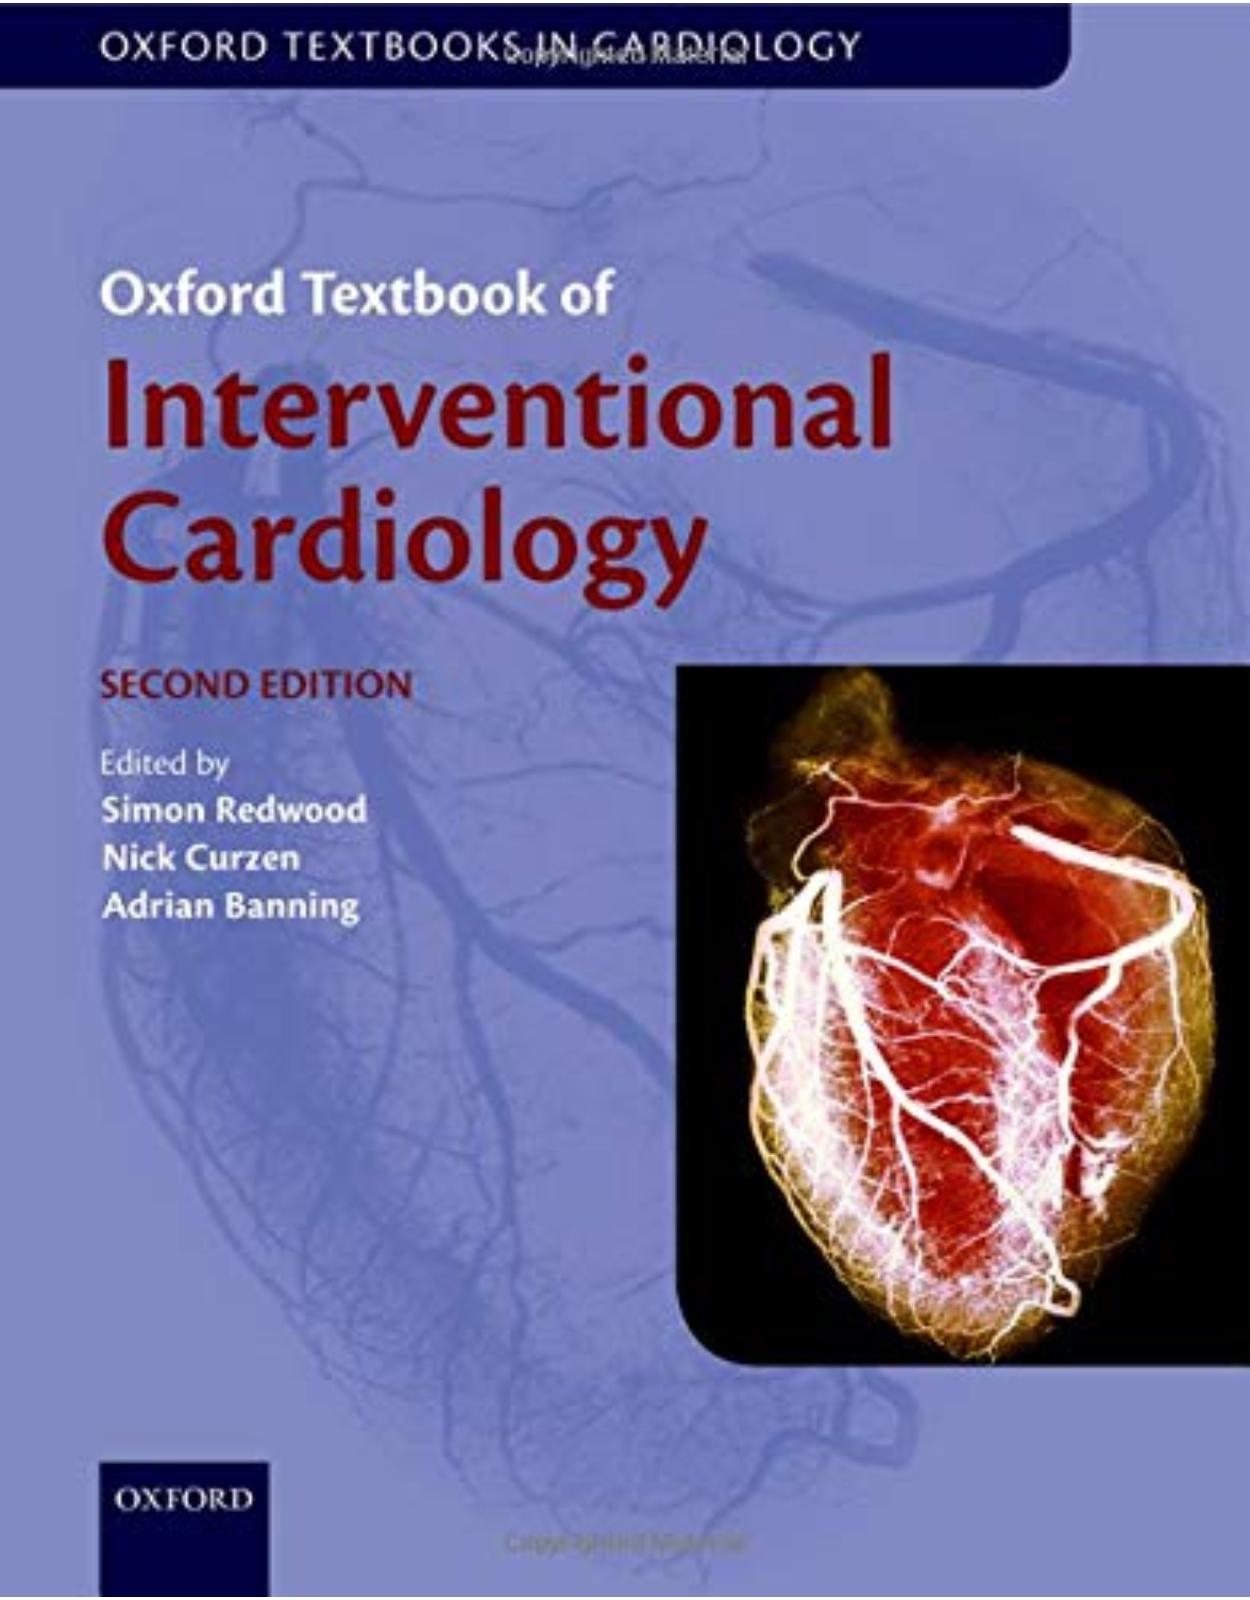 Oxford Textbook of Interventional Cardiology. Second Edition